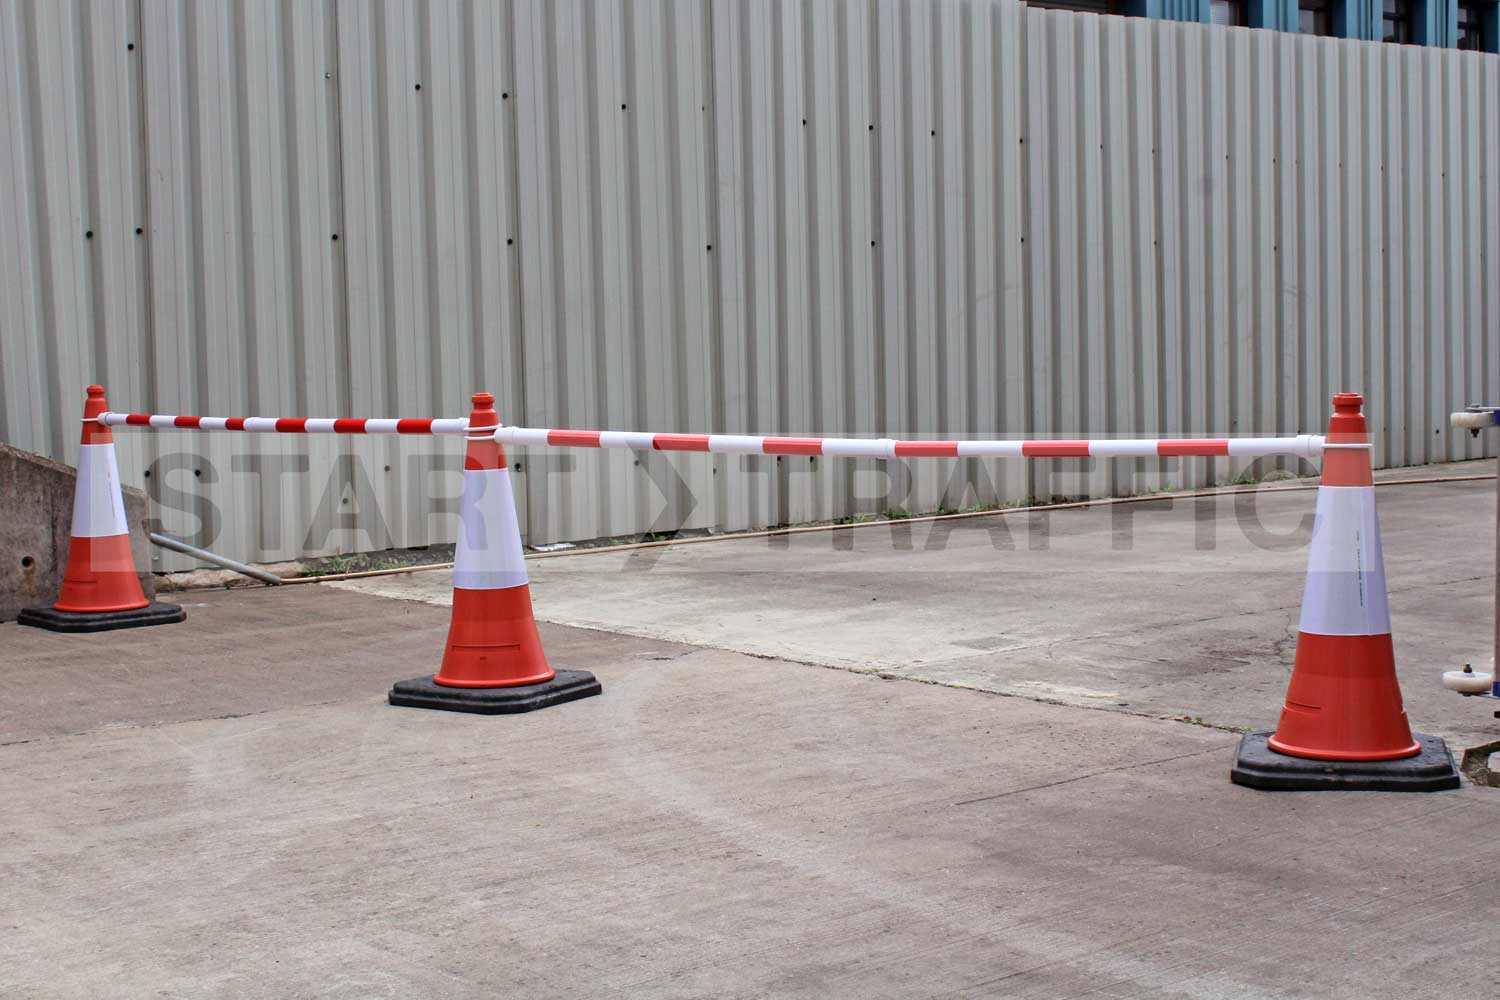 Expandable Cone Bar Barriers in use blocking exit